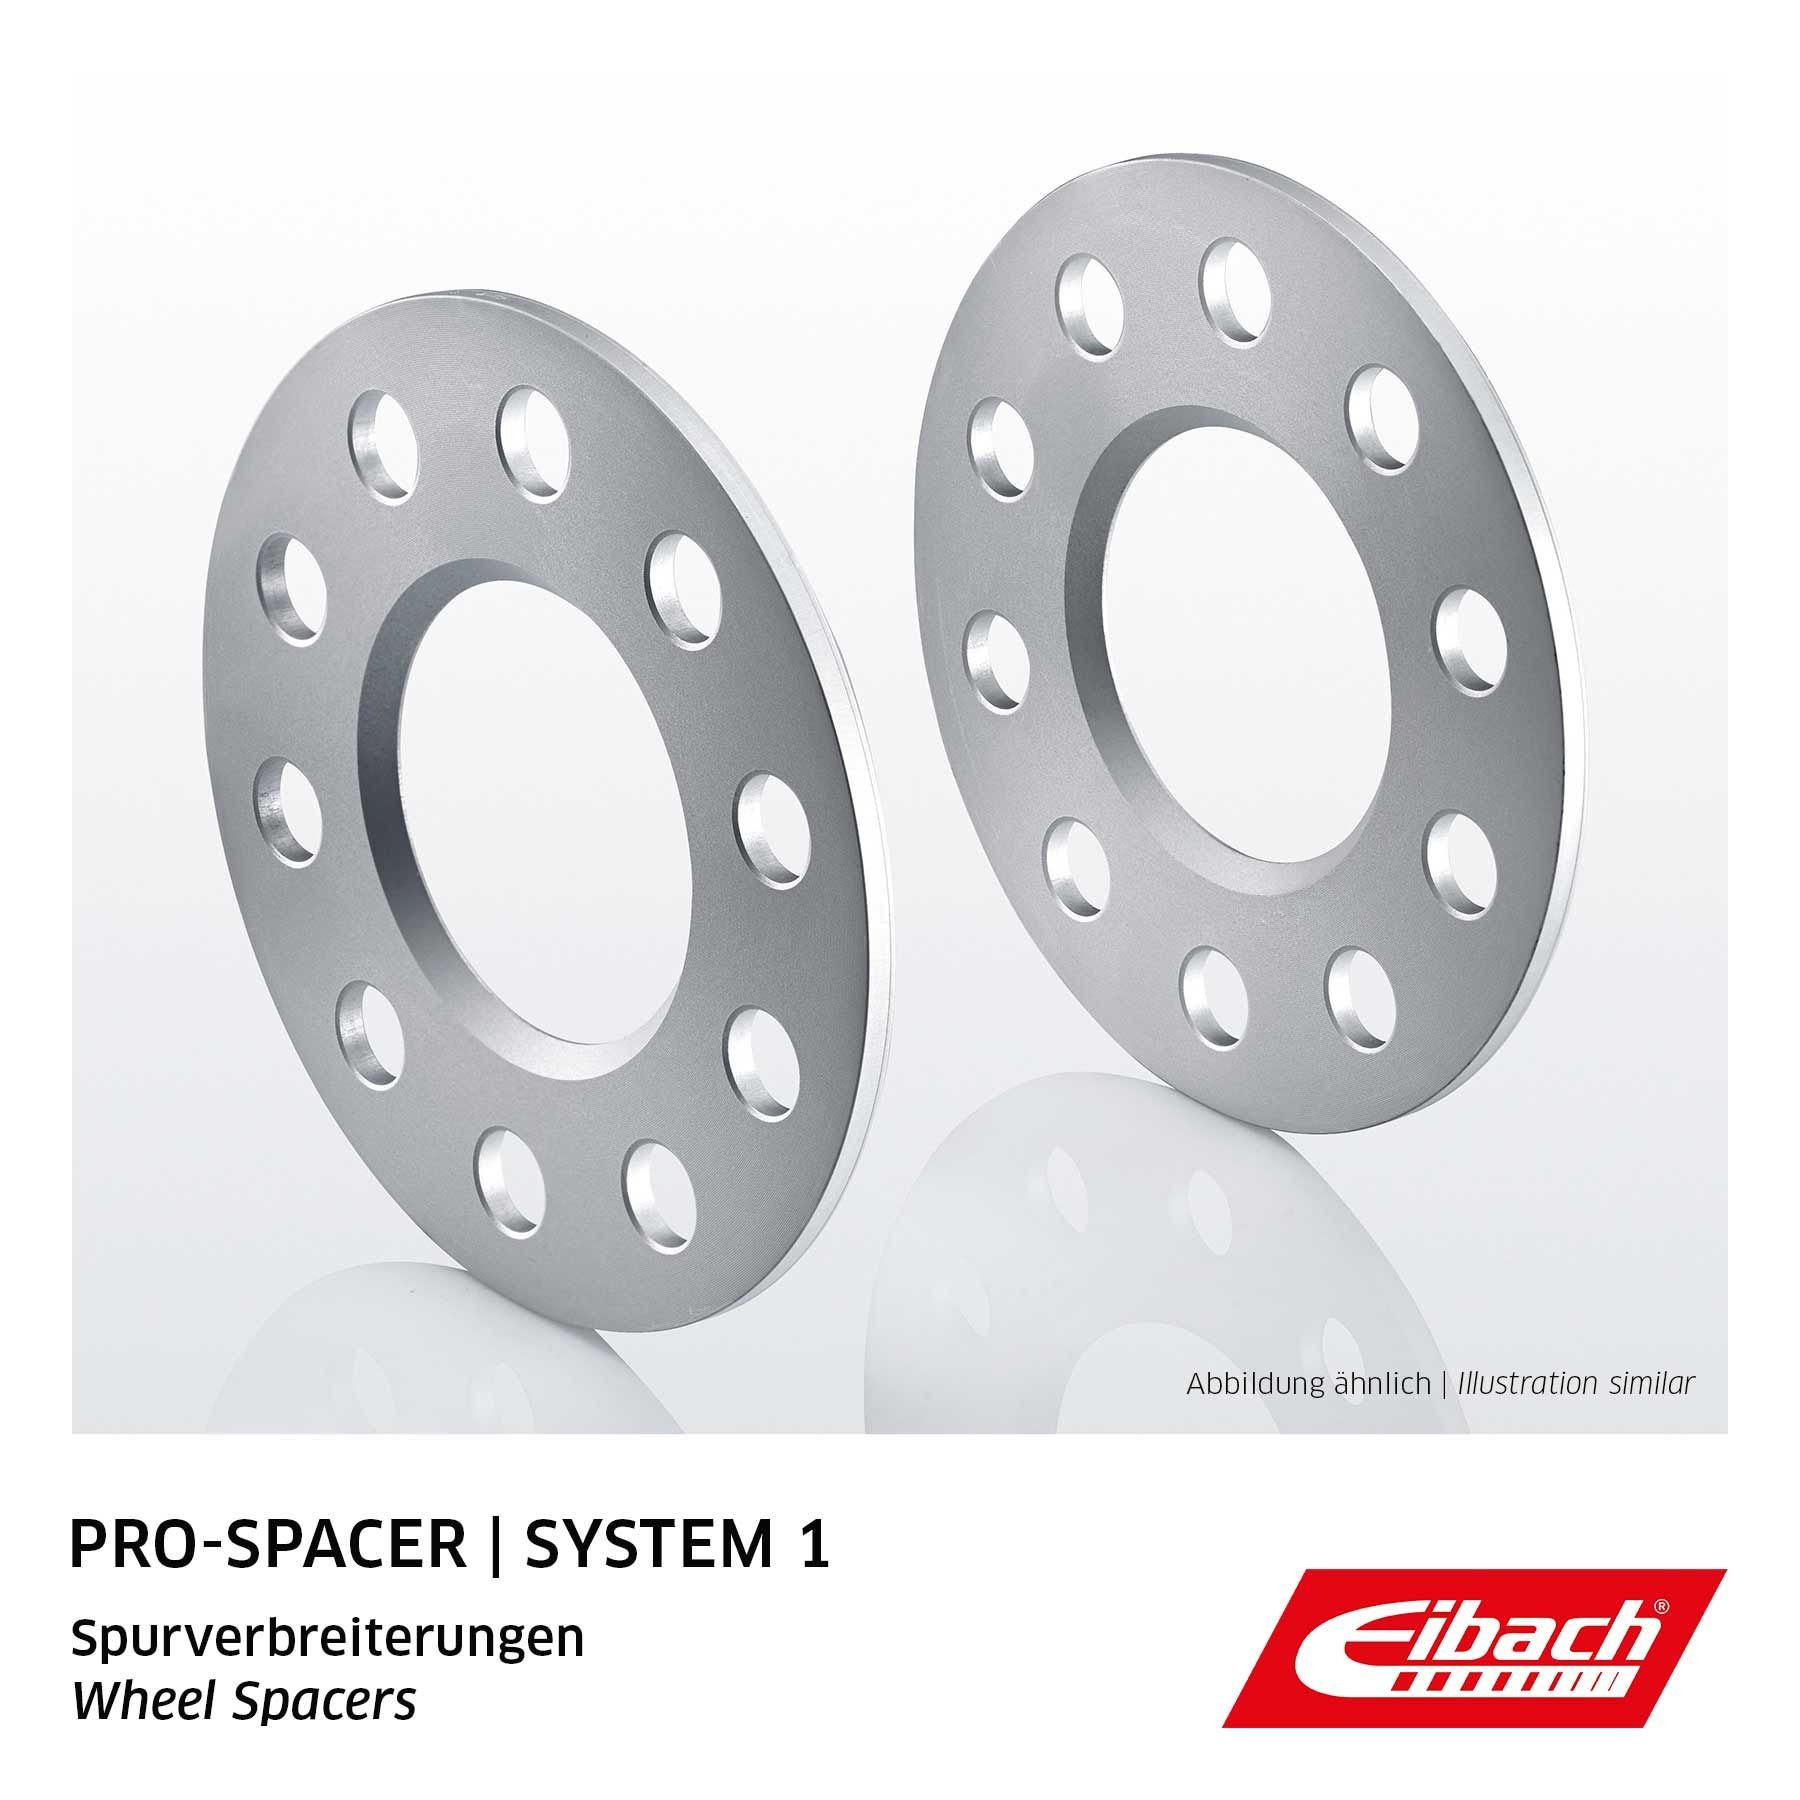 Opel OMEGA Tuning parts - Wheel spacer EIBACH S90-1-05-013